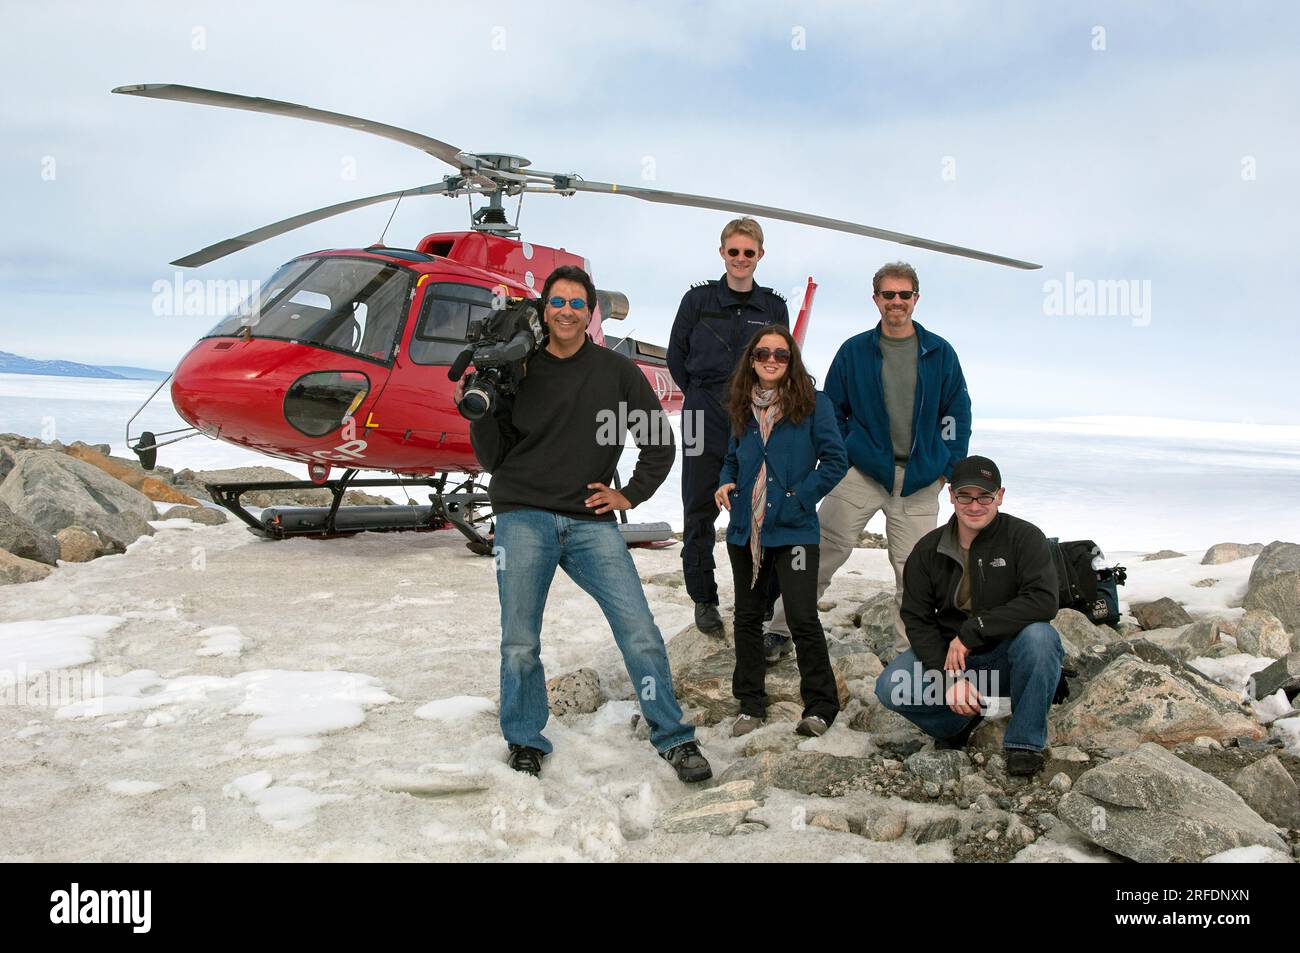 Documentary film crew with helicopter atop ice cap near Nuuk, Greenland Stock Photo